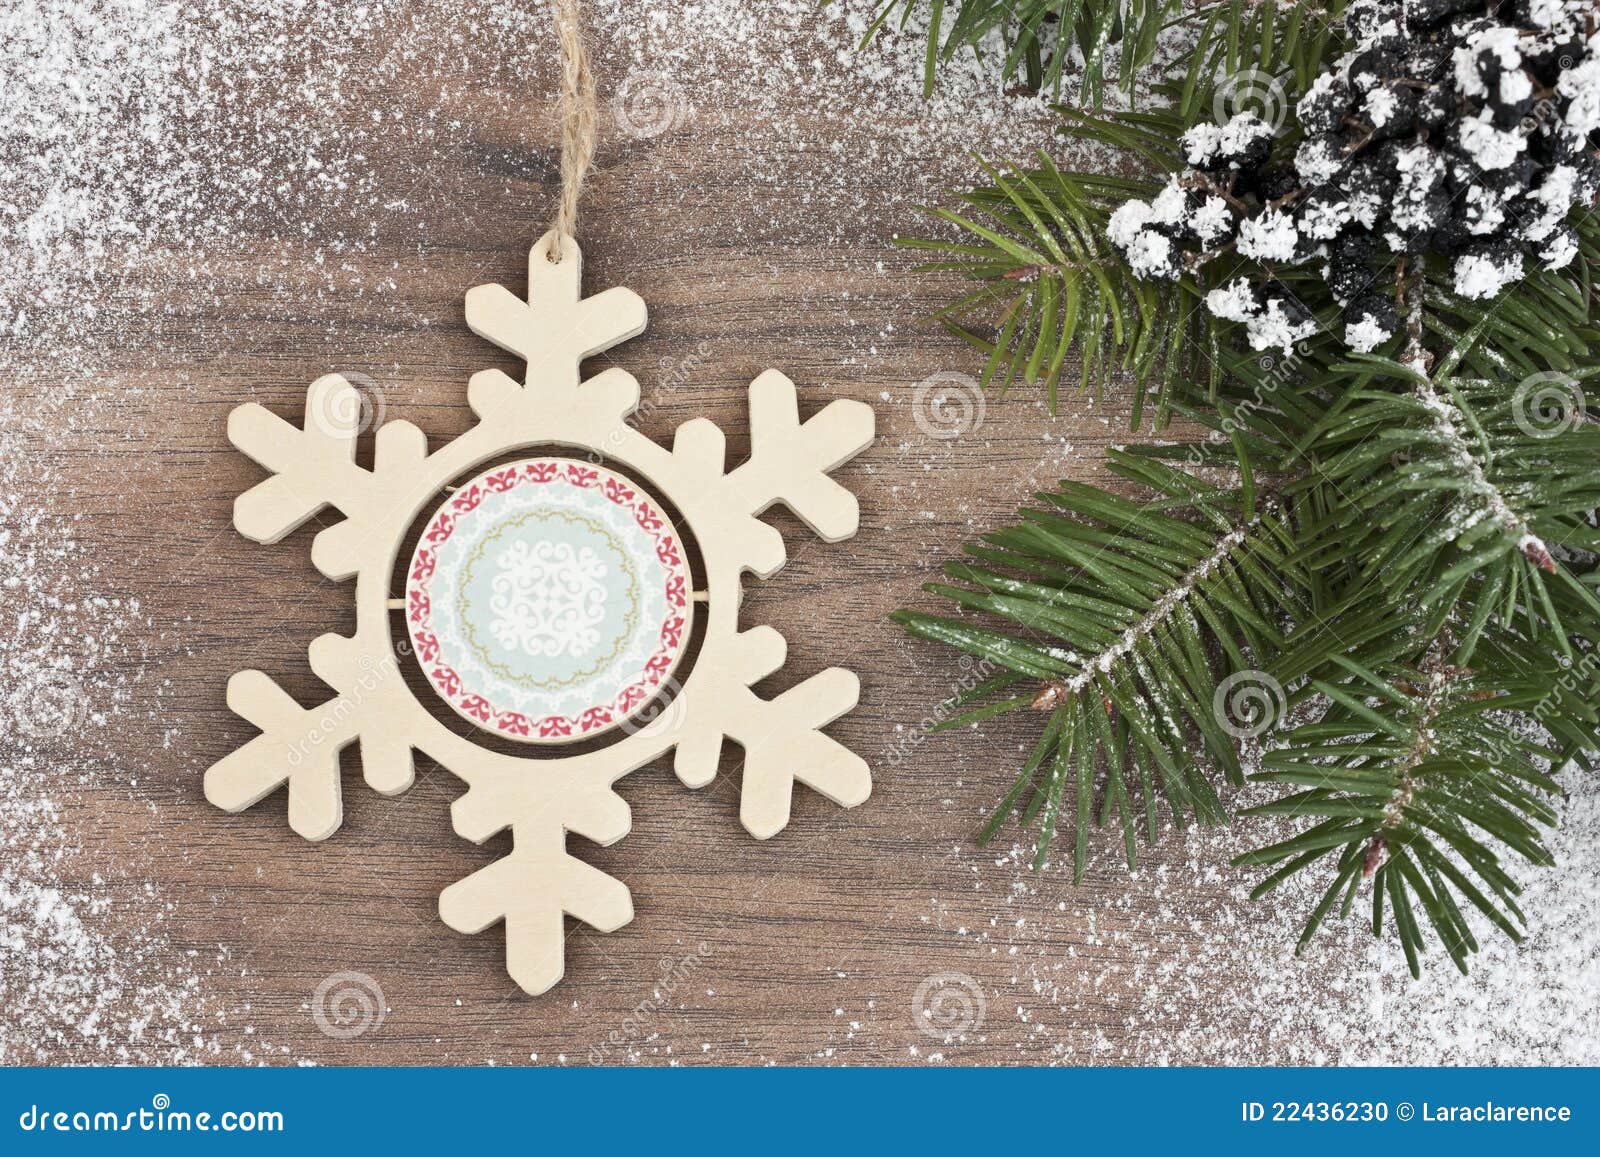 Snowflake with pine stock photo. Image of event, beautiful - 22436230